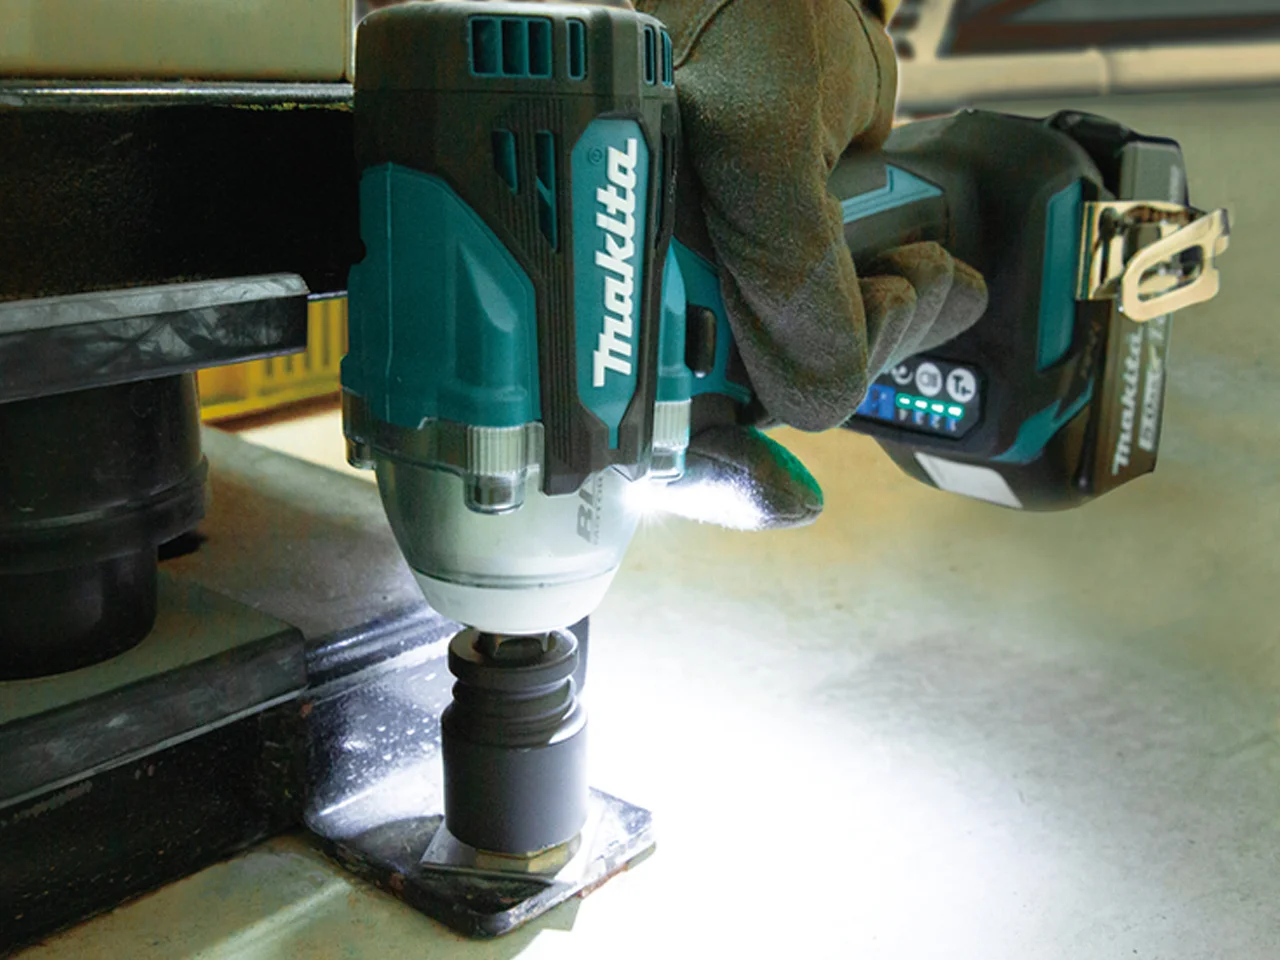 Makita Power Tools and Accessories